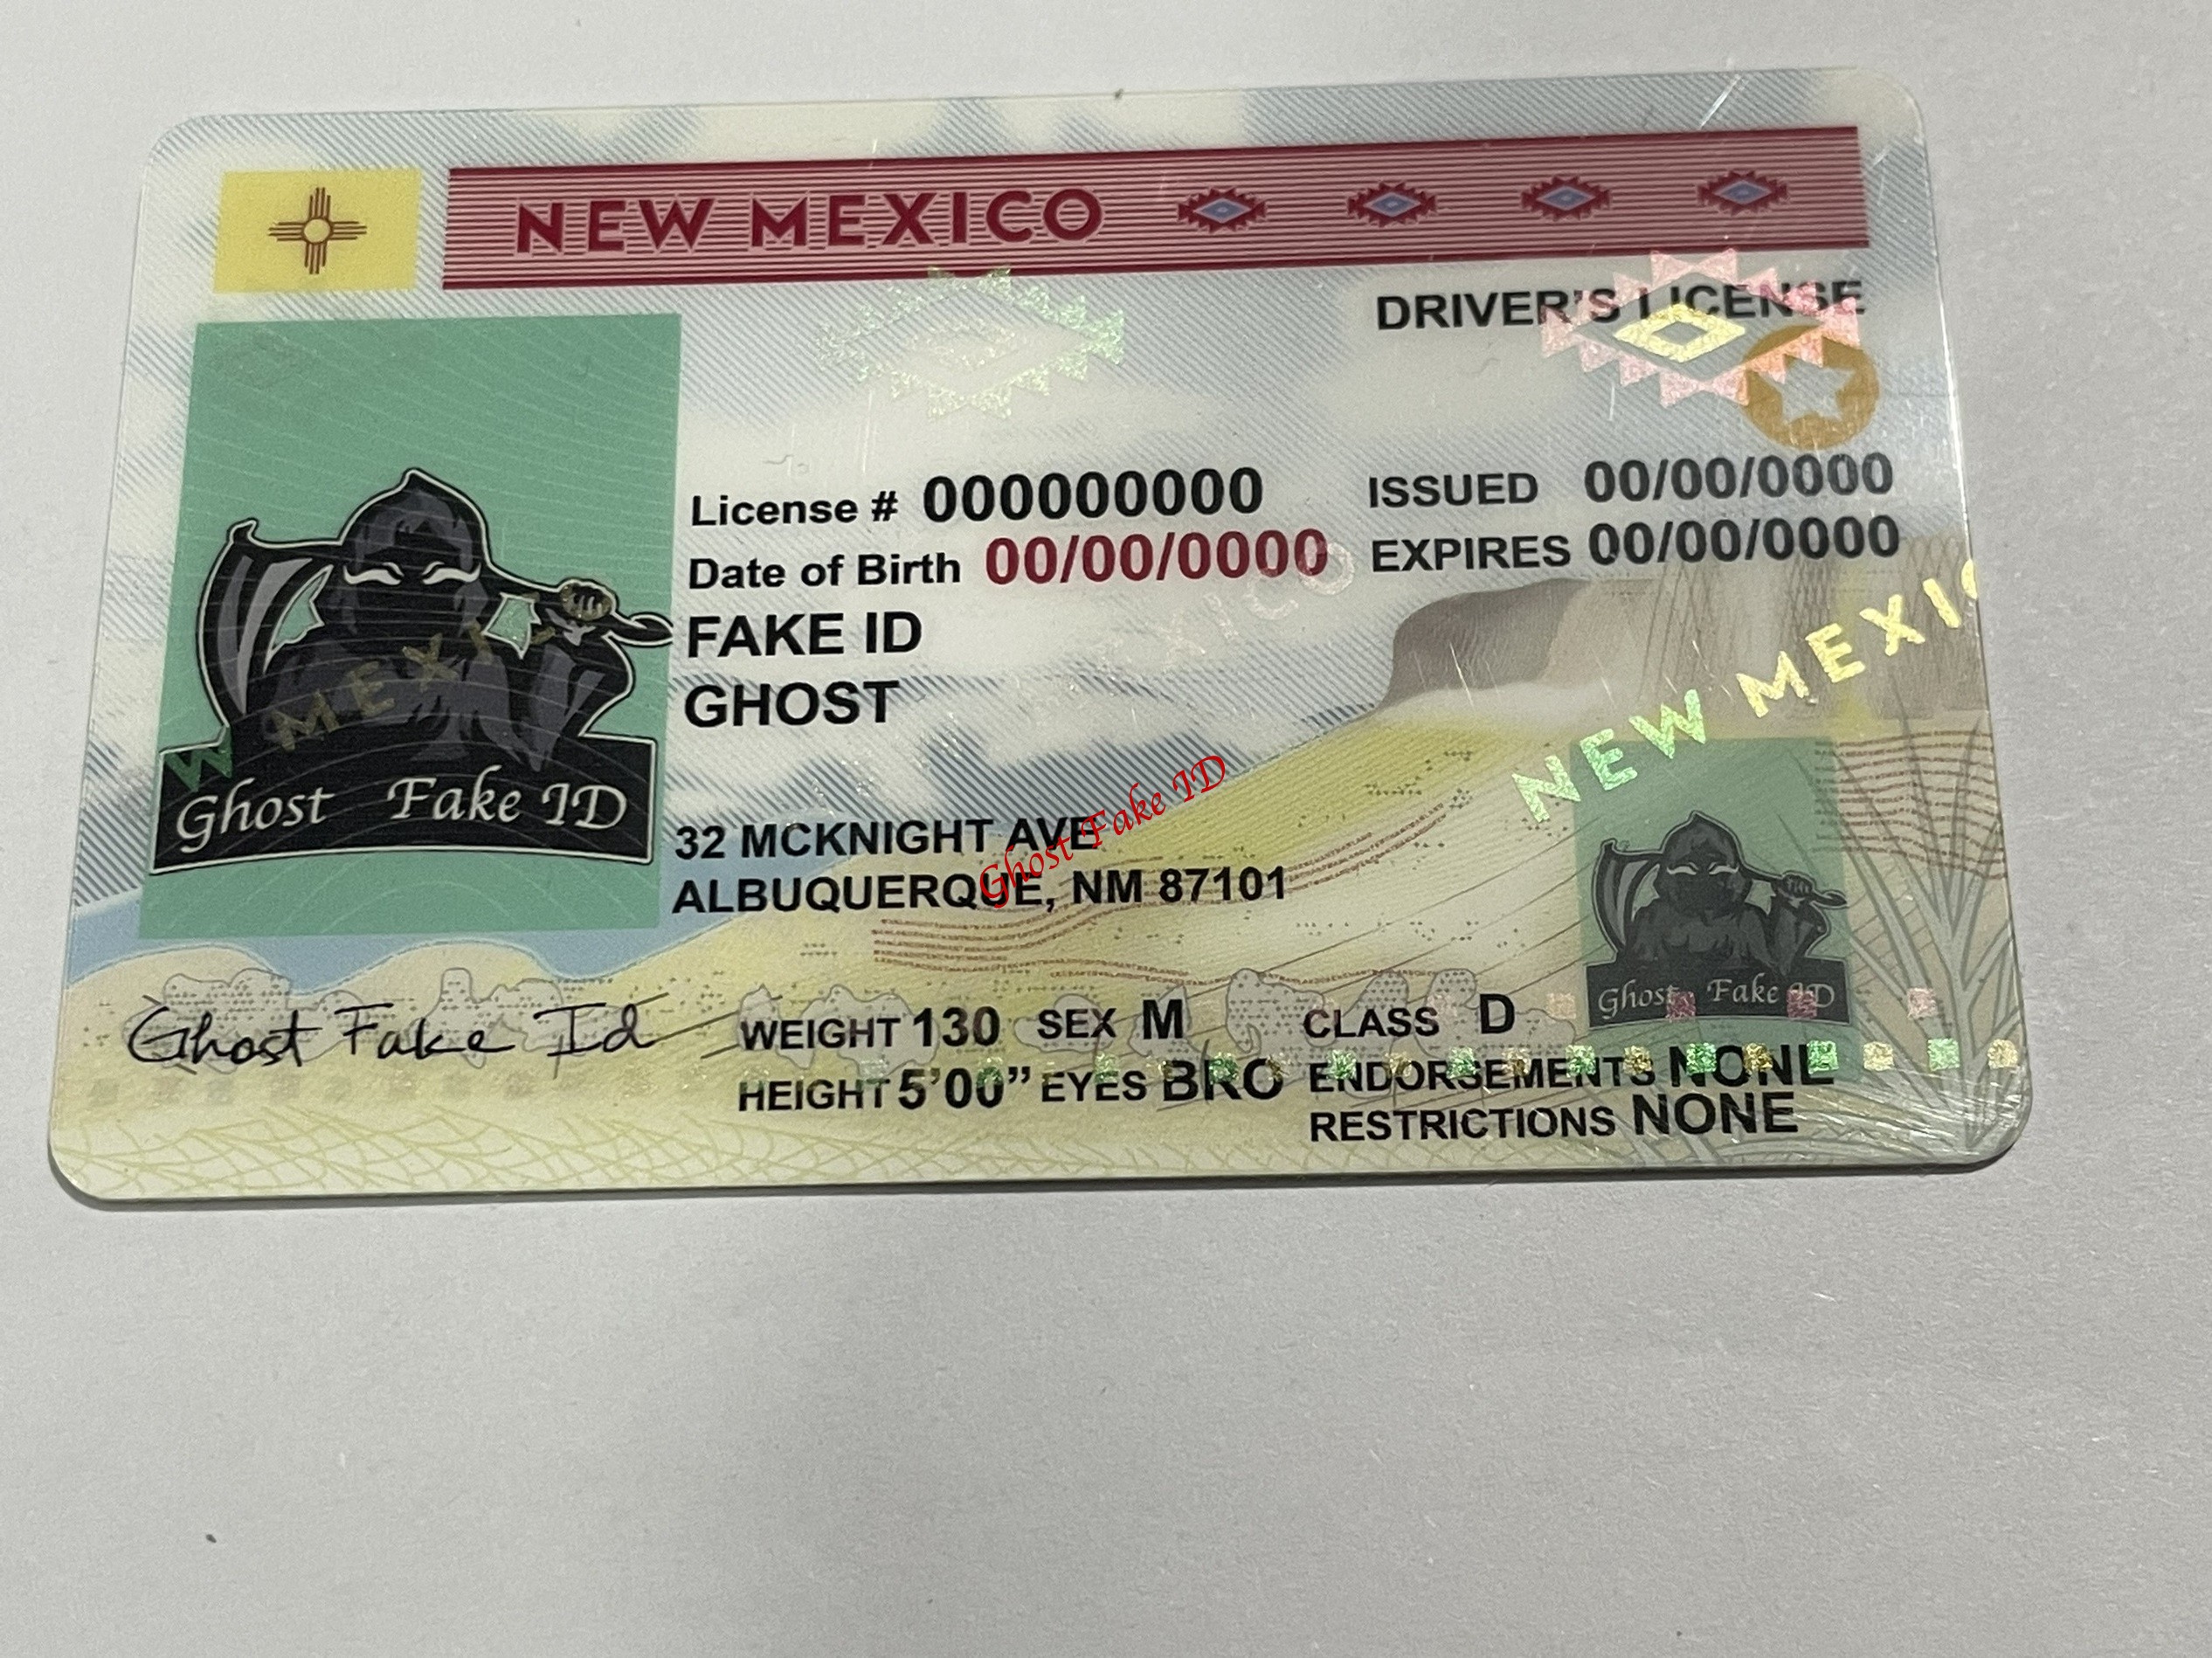 New Mexico - Scanable fake id